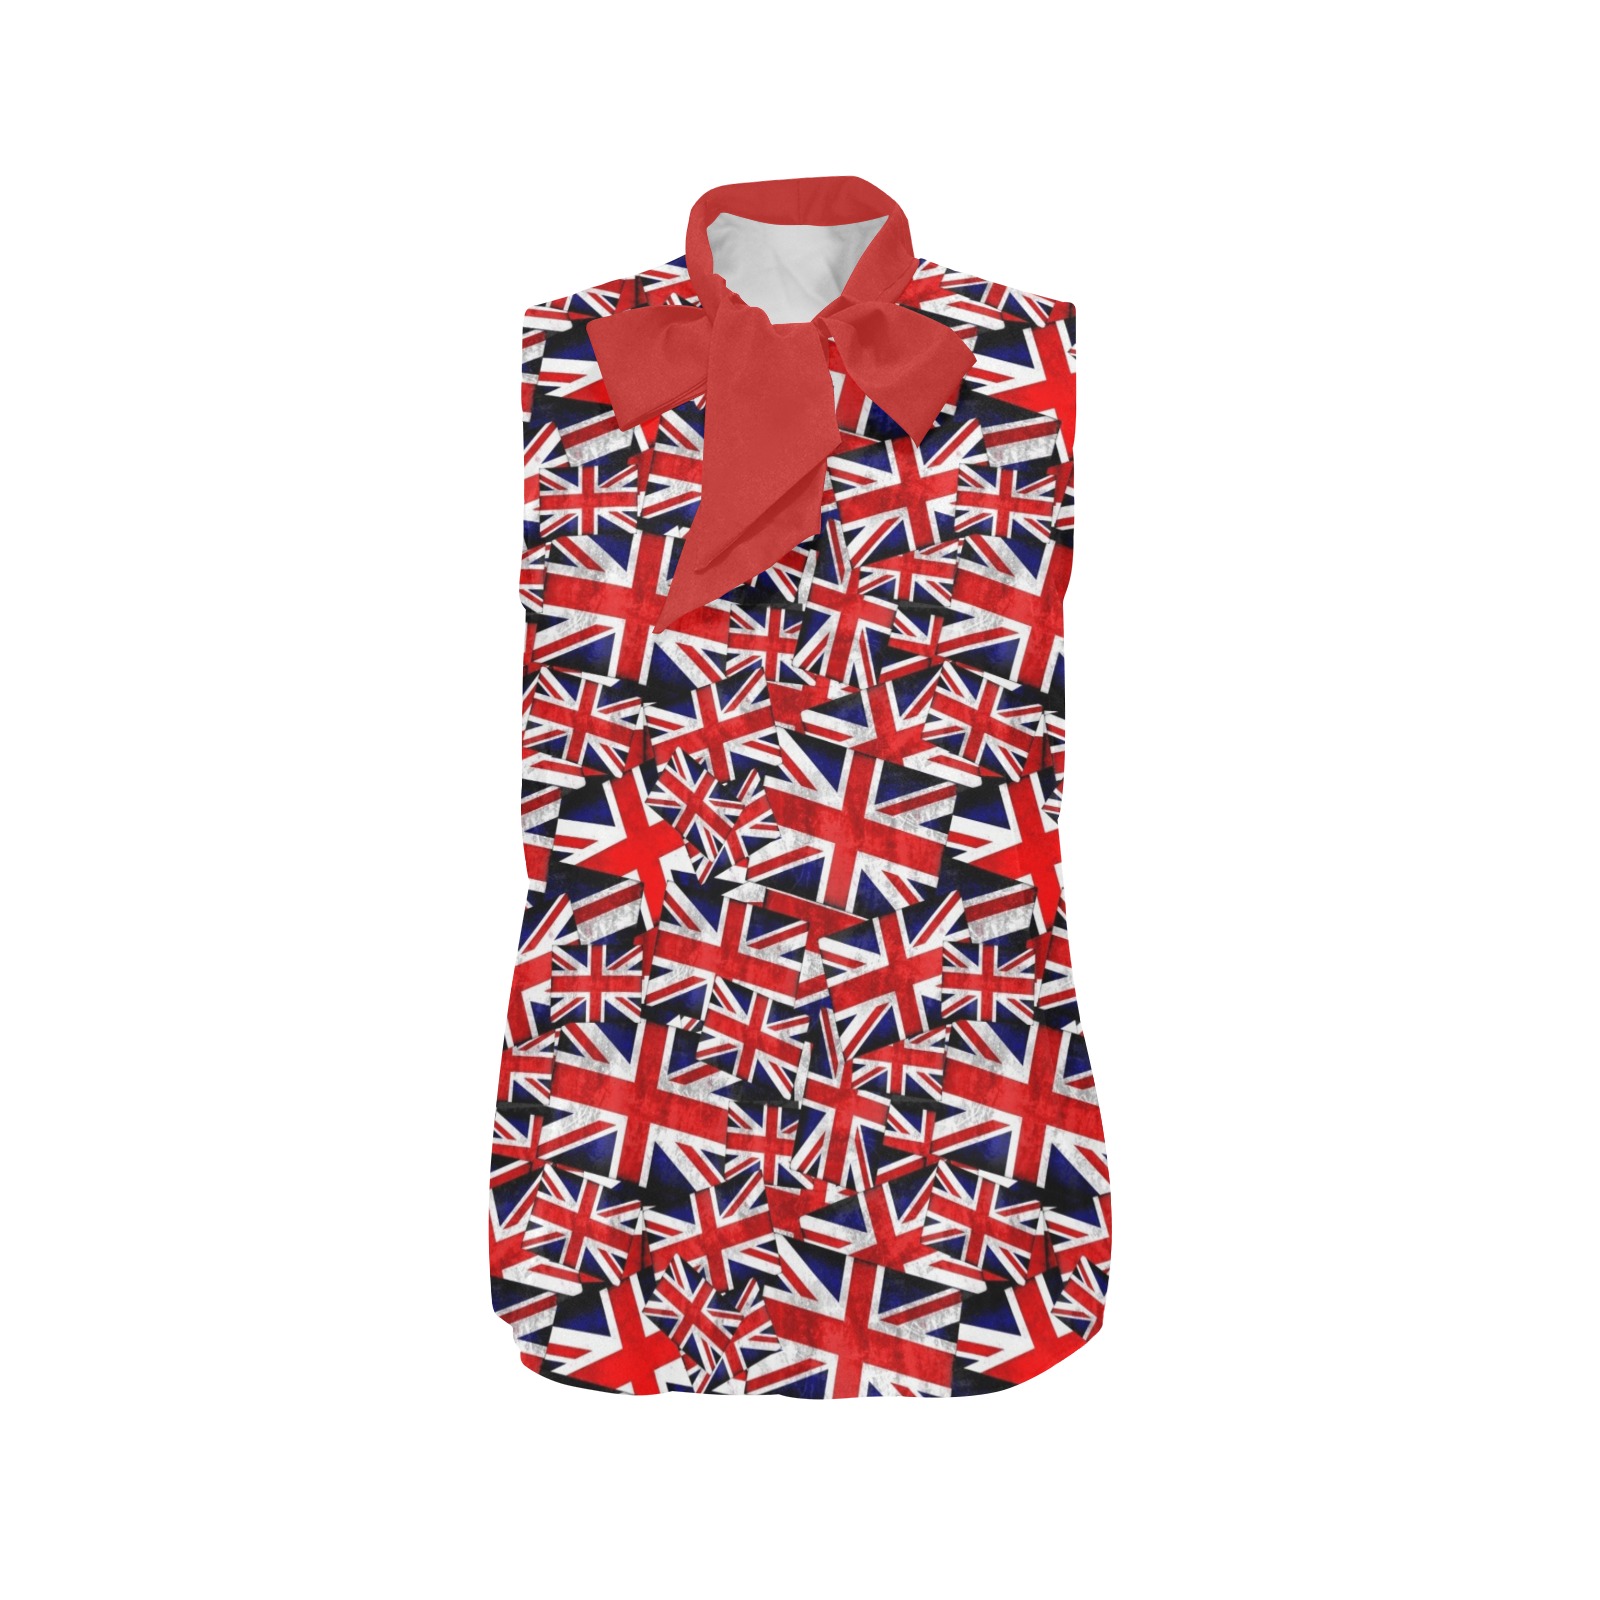 Union Jack British Flags - Red Tie Women's Bow Tie V-Neck Sleeveless Shirt (Model T69)